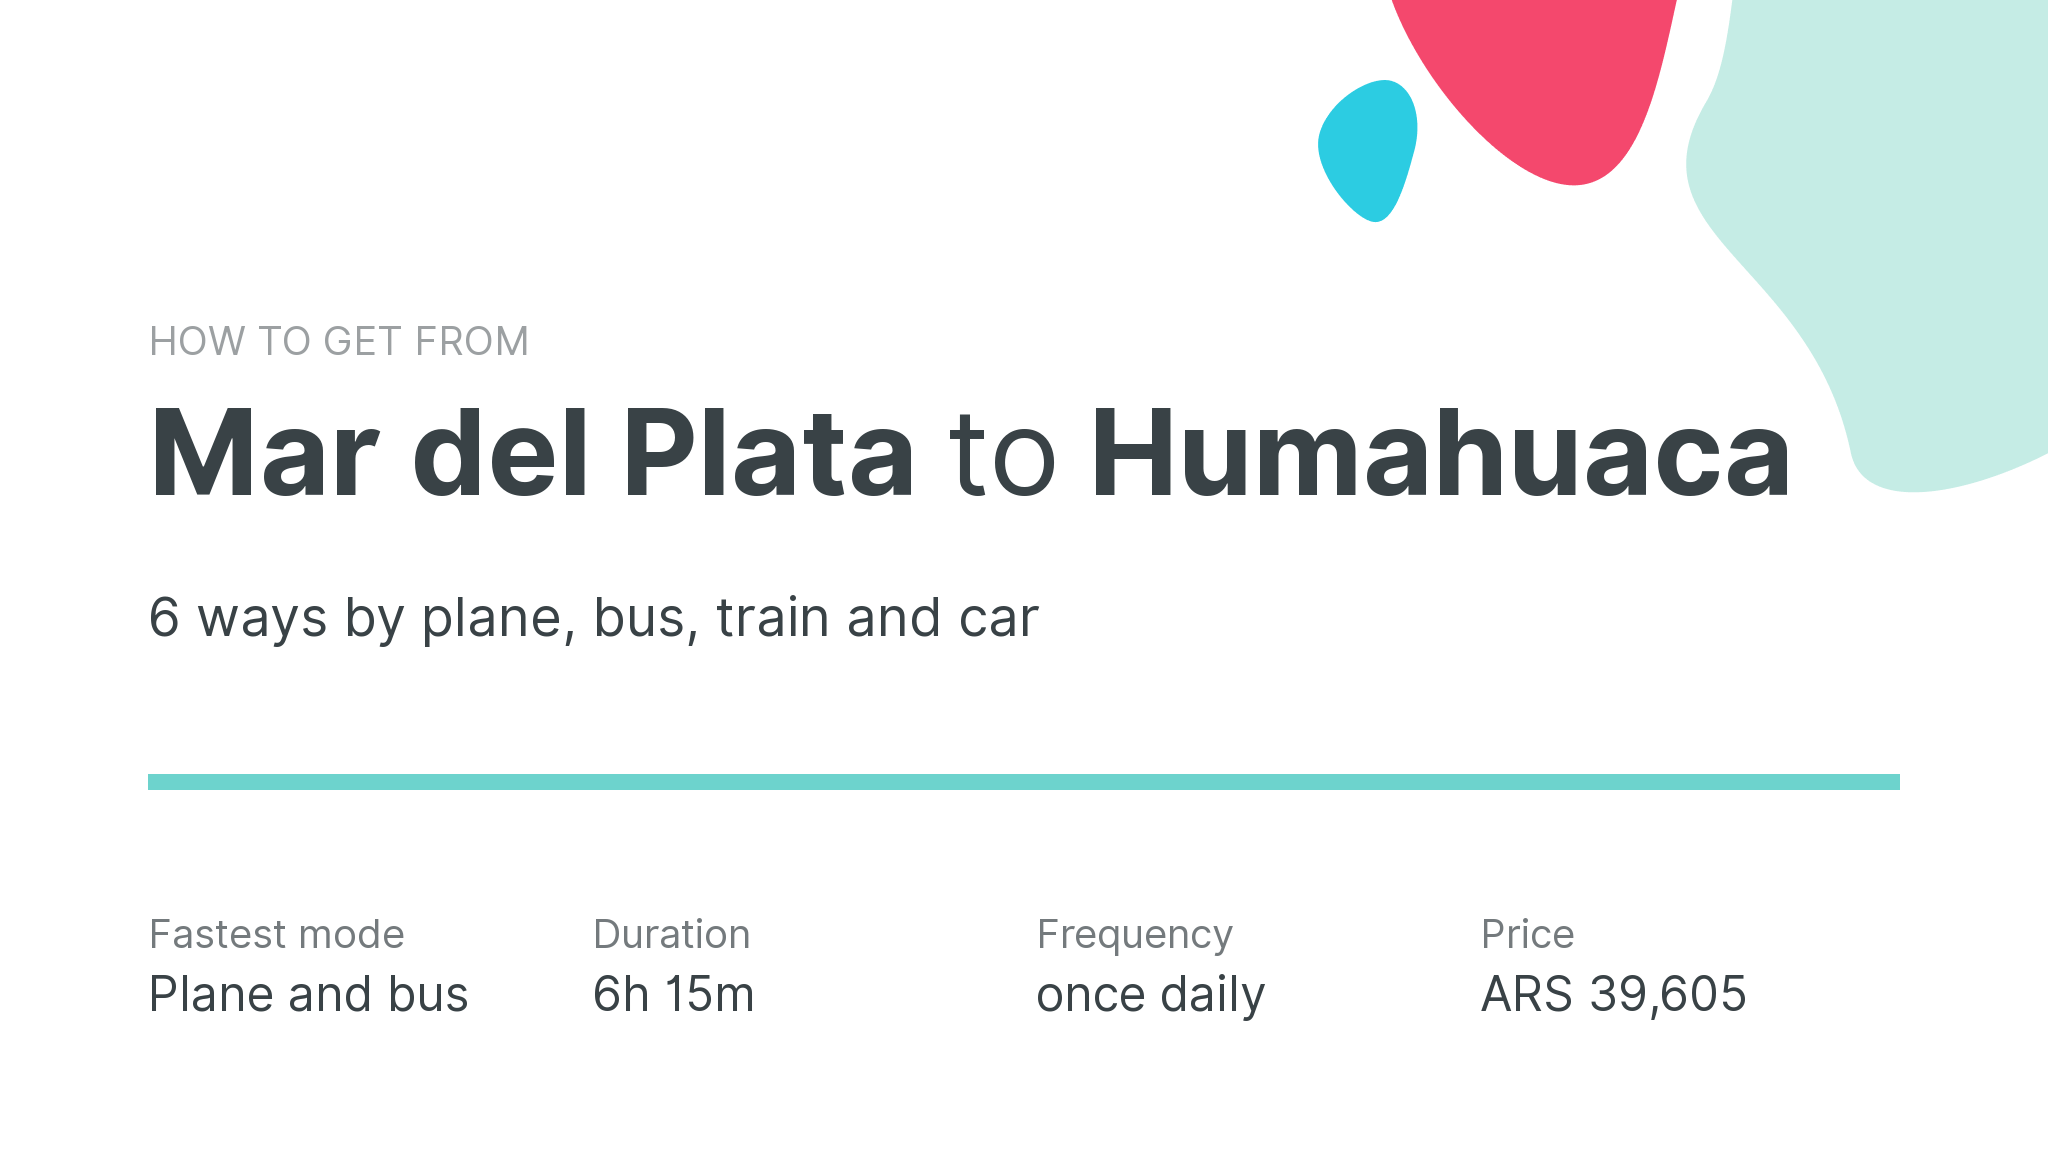 How do I get from Mar del Plata to Humahuaca